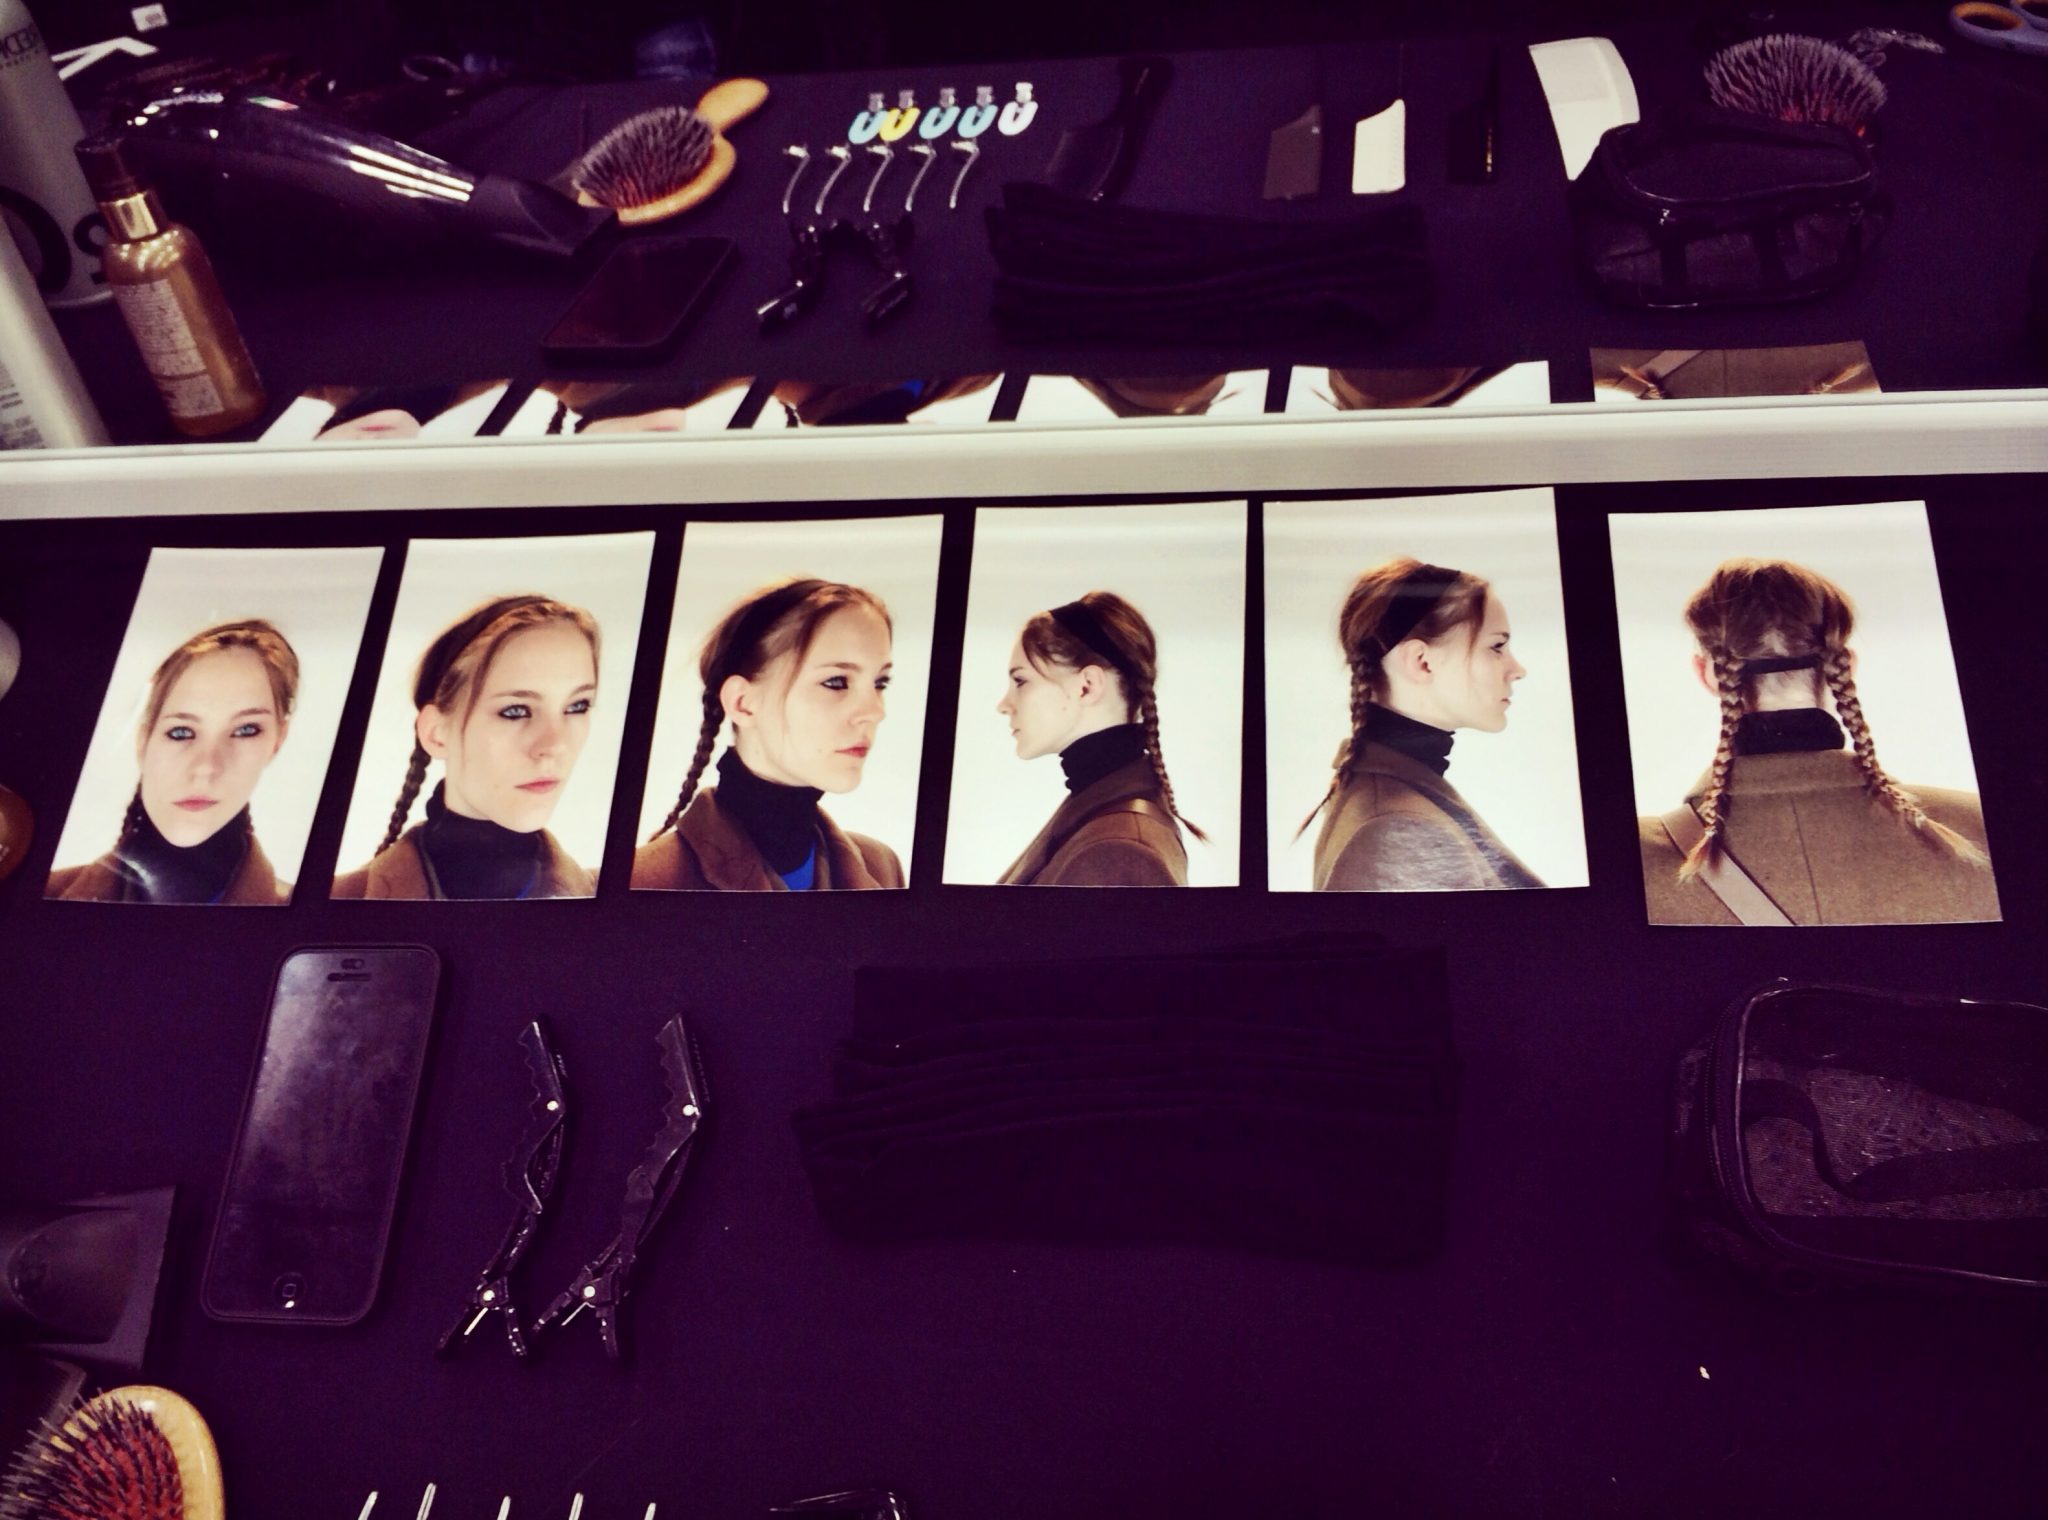 At Marc by Marc Jacobs its all about tight, cool girl braids.